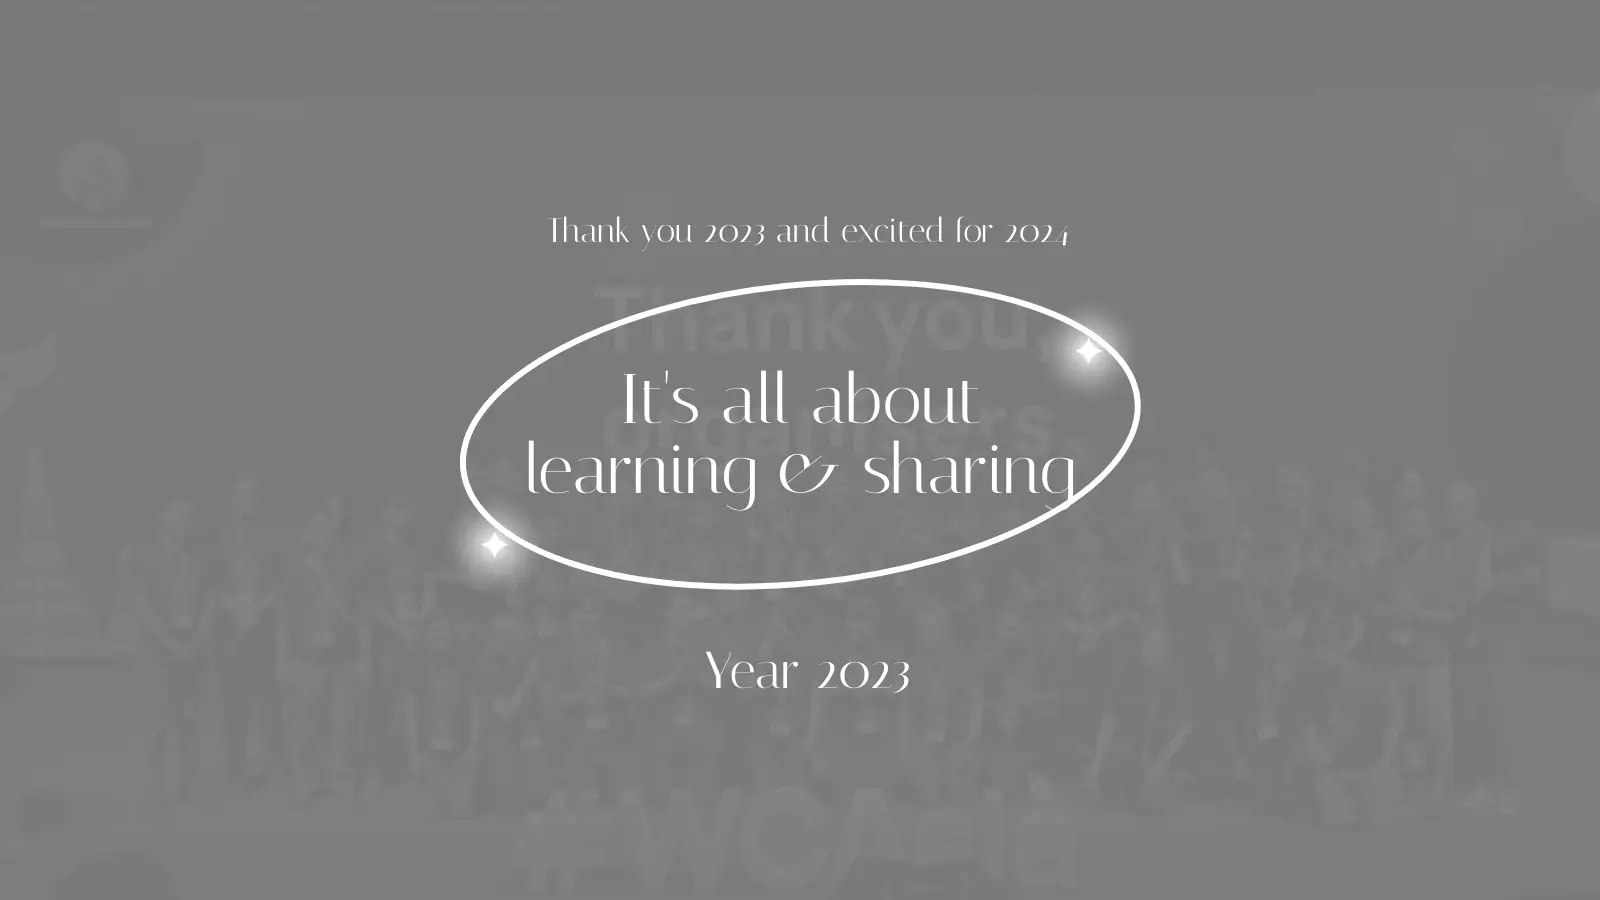 Year 2023 – A year of learning and exploring